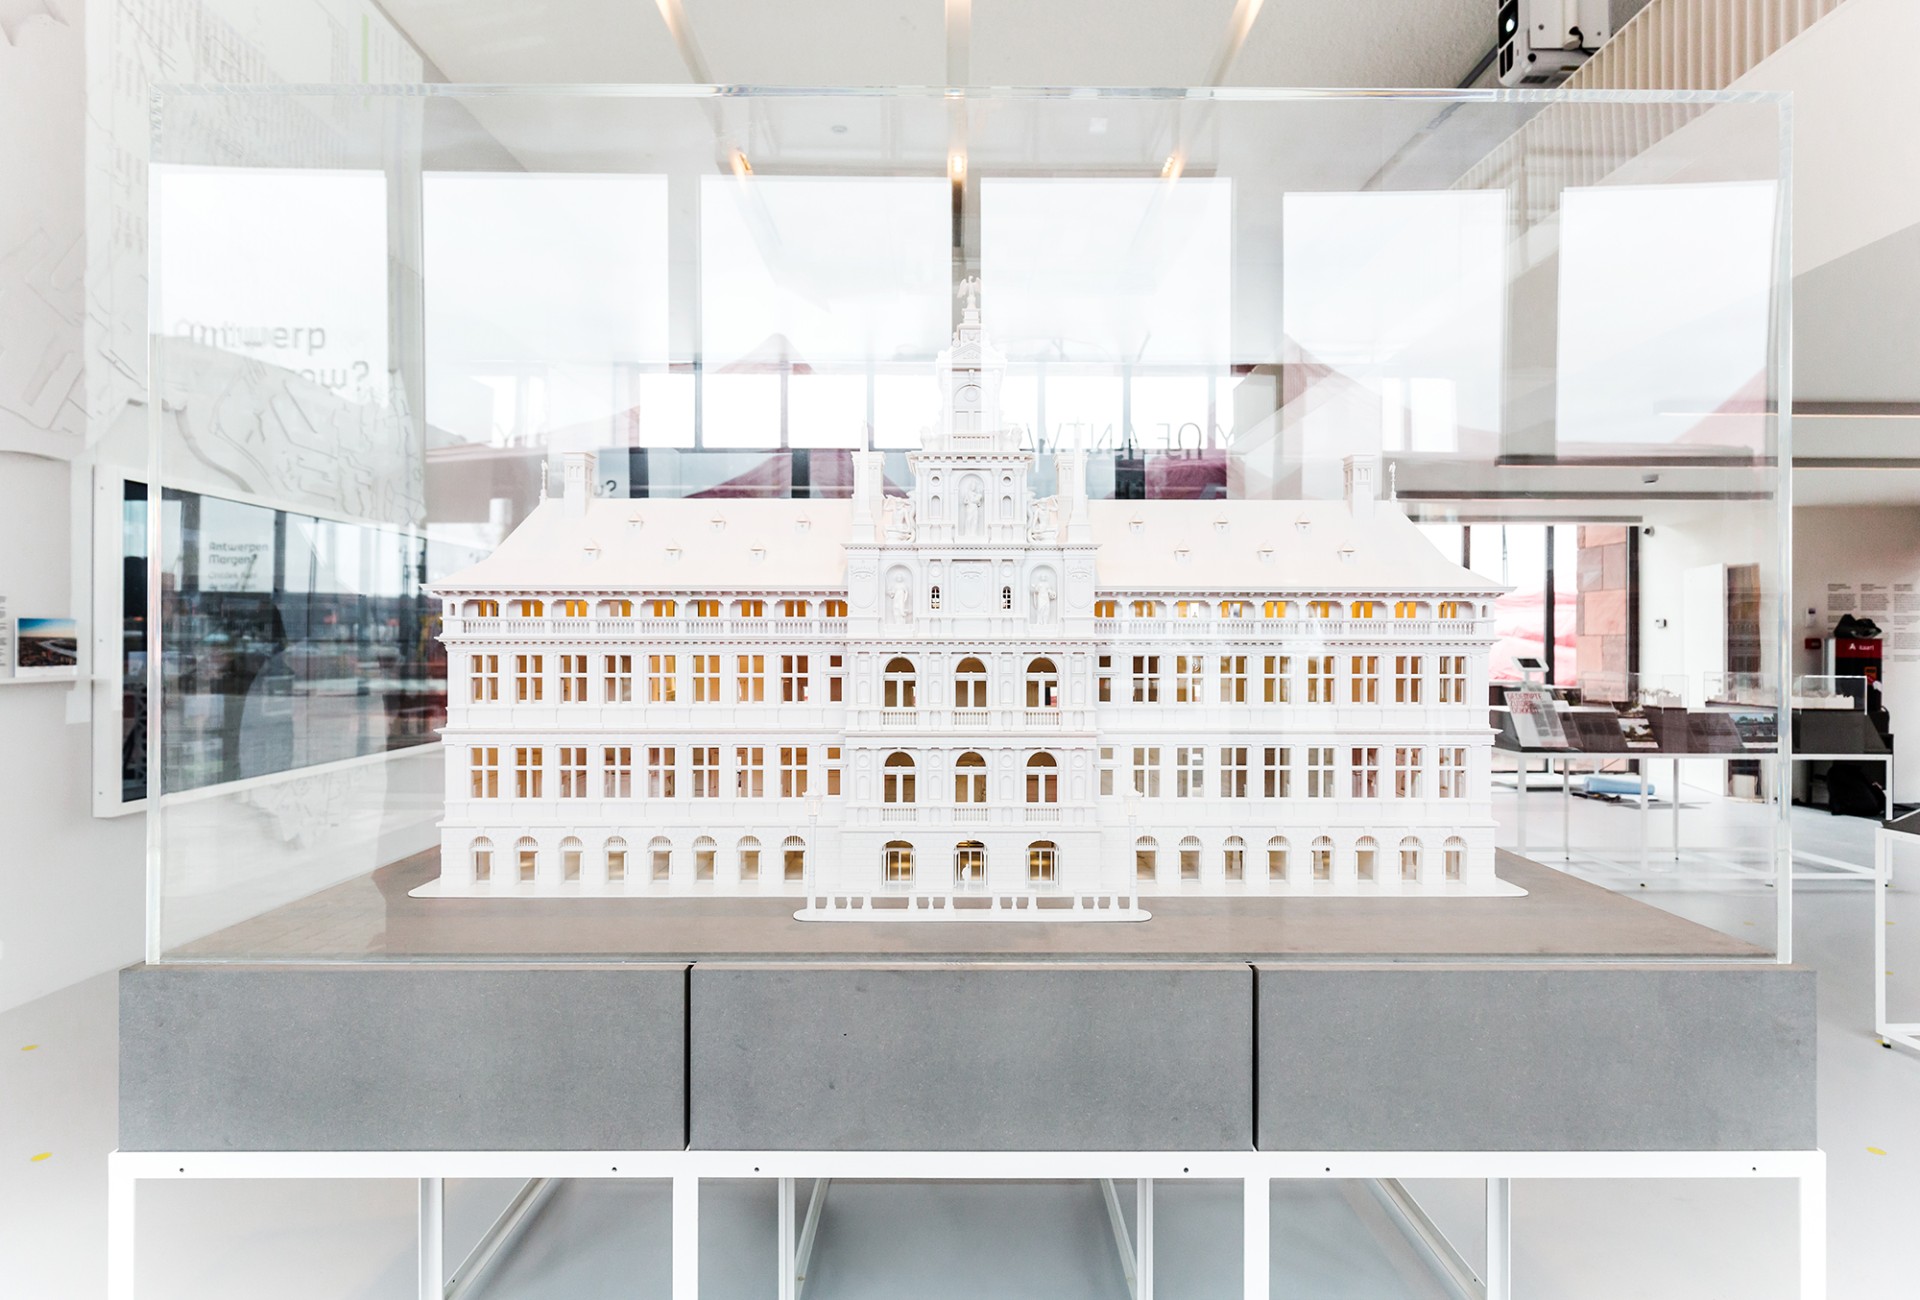 3D maquette stadhuis na renovatie © Materialise